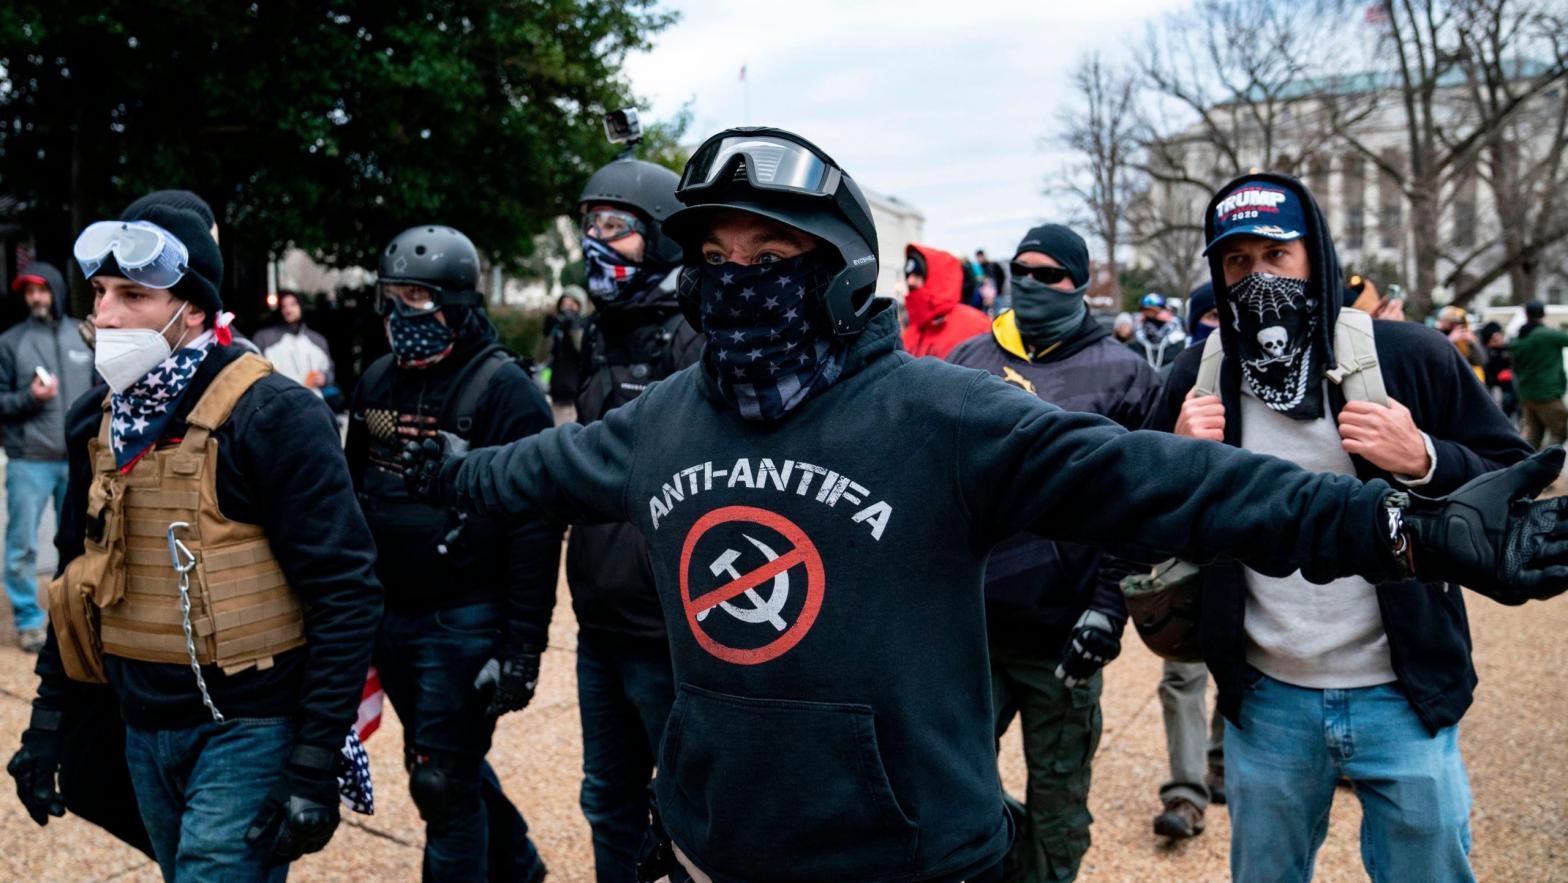 A protester who declared himself to be a member of the Proud Boys, centre, seen here amid other Donald Trump supporters outside the Capitol on Jan. 6. (Photo: Alex Edelman / AFP, Getty Images)